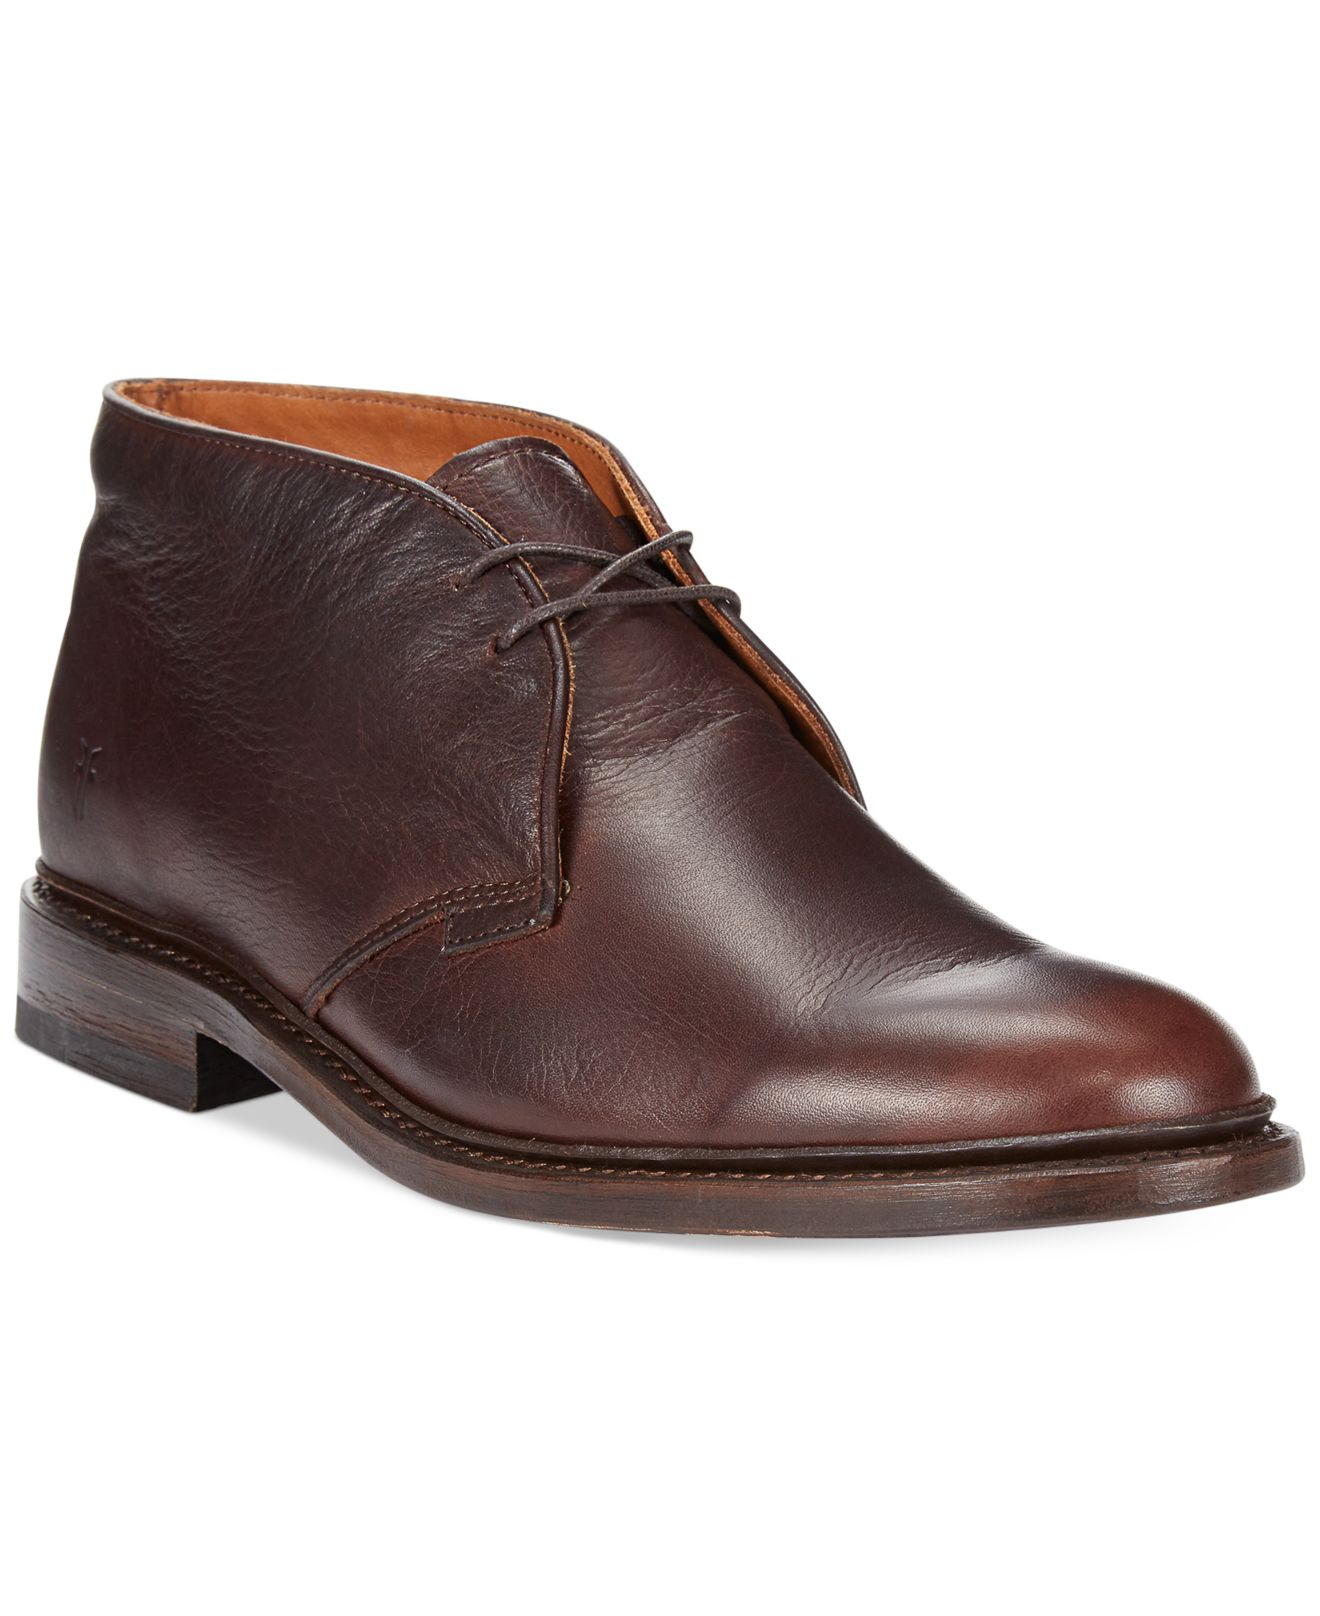 Lyst - Frye James Chukka Boots in Brown for Men